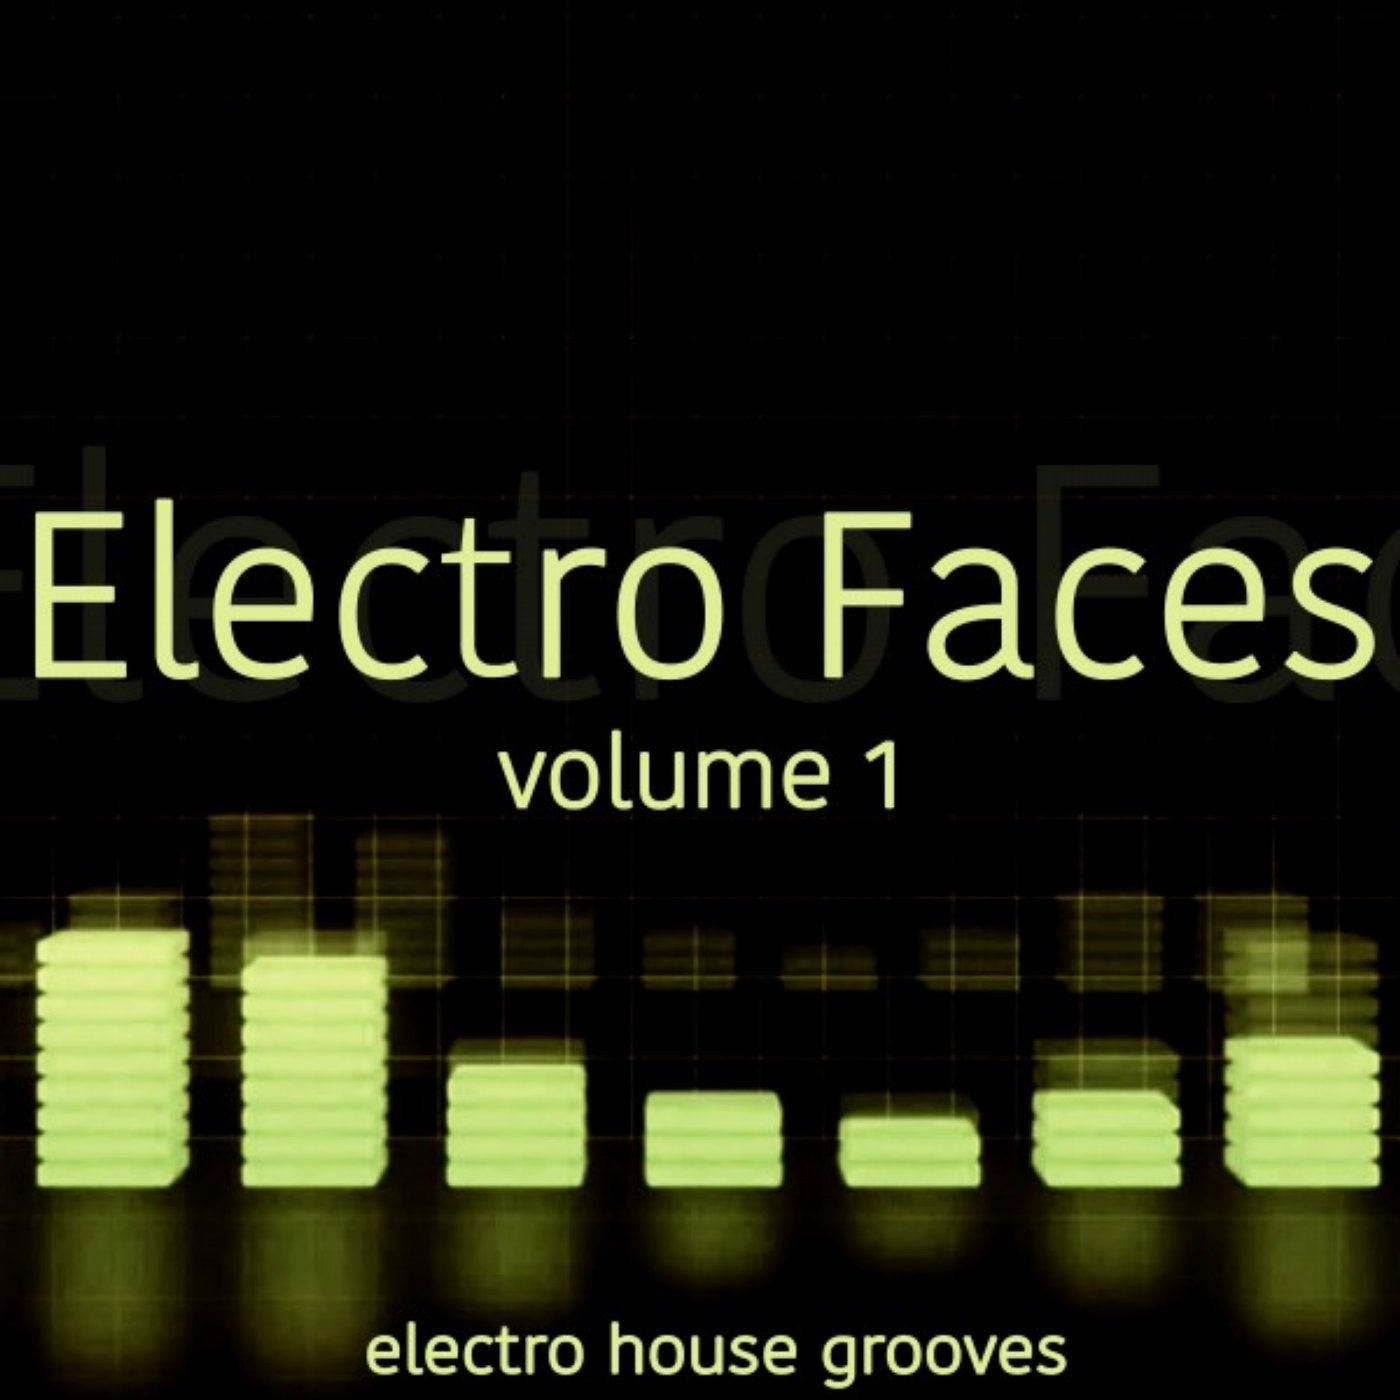 Electro Faces, Vol. 1 (Electro House Grooves)